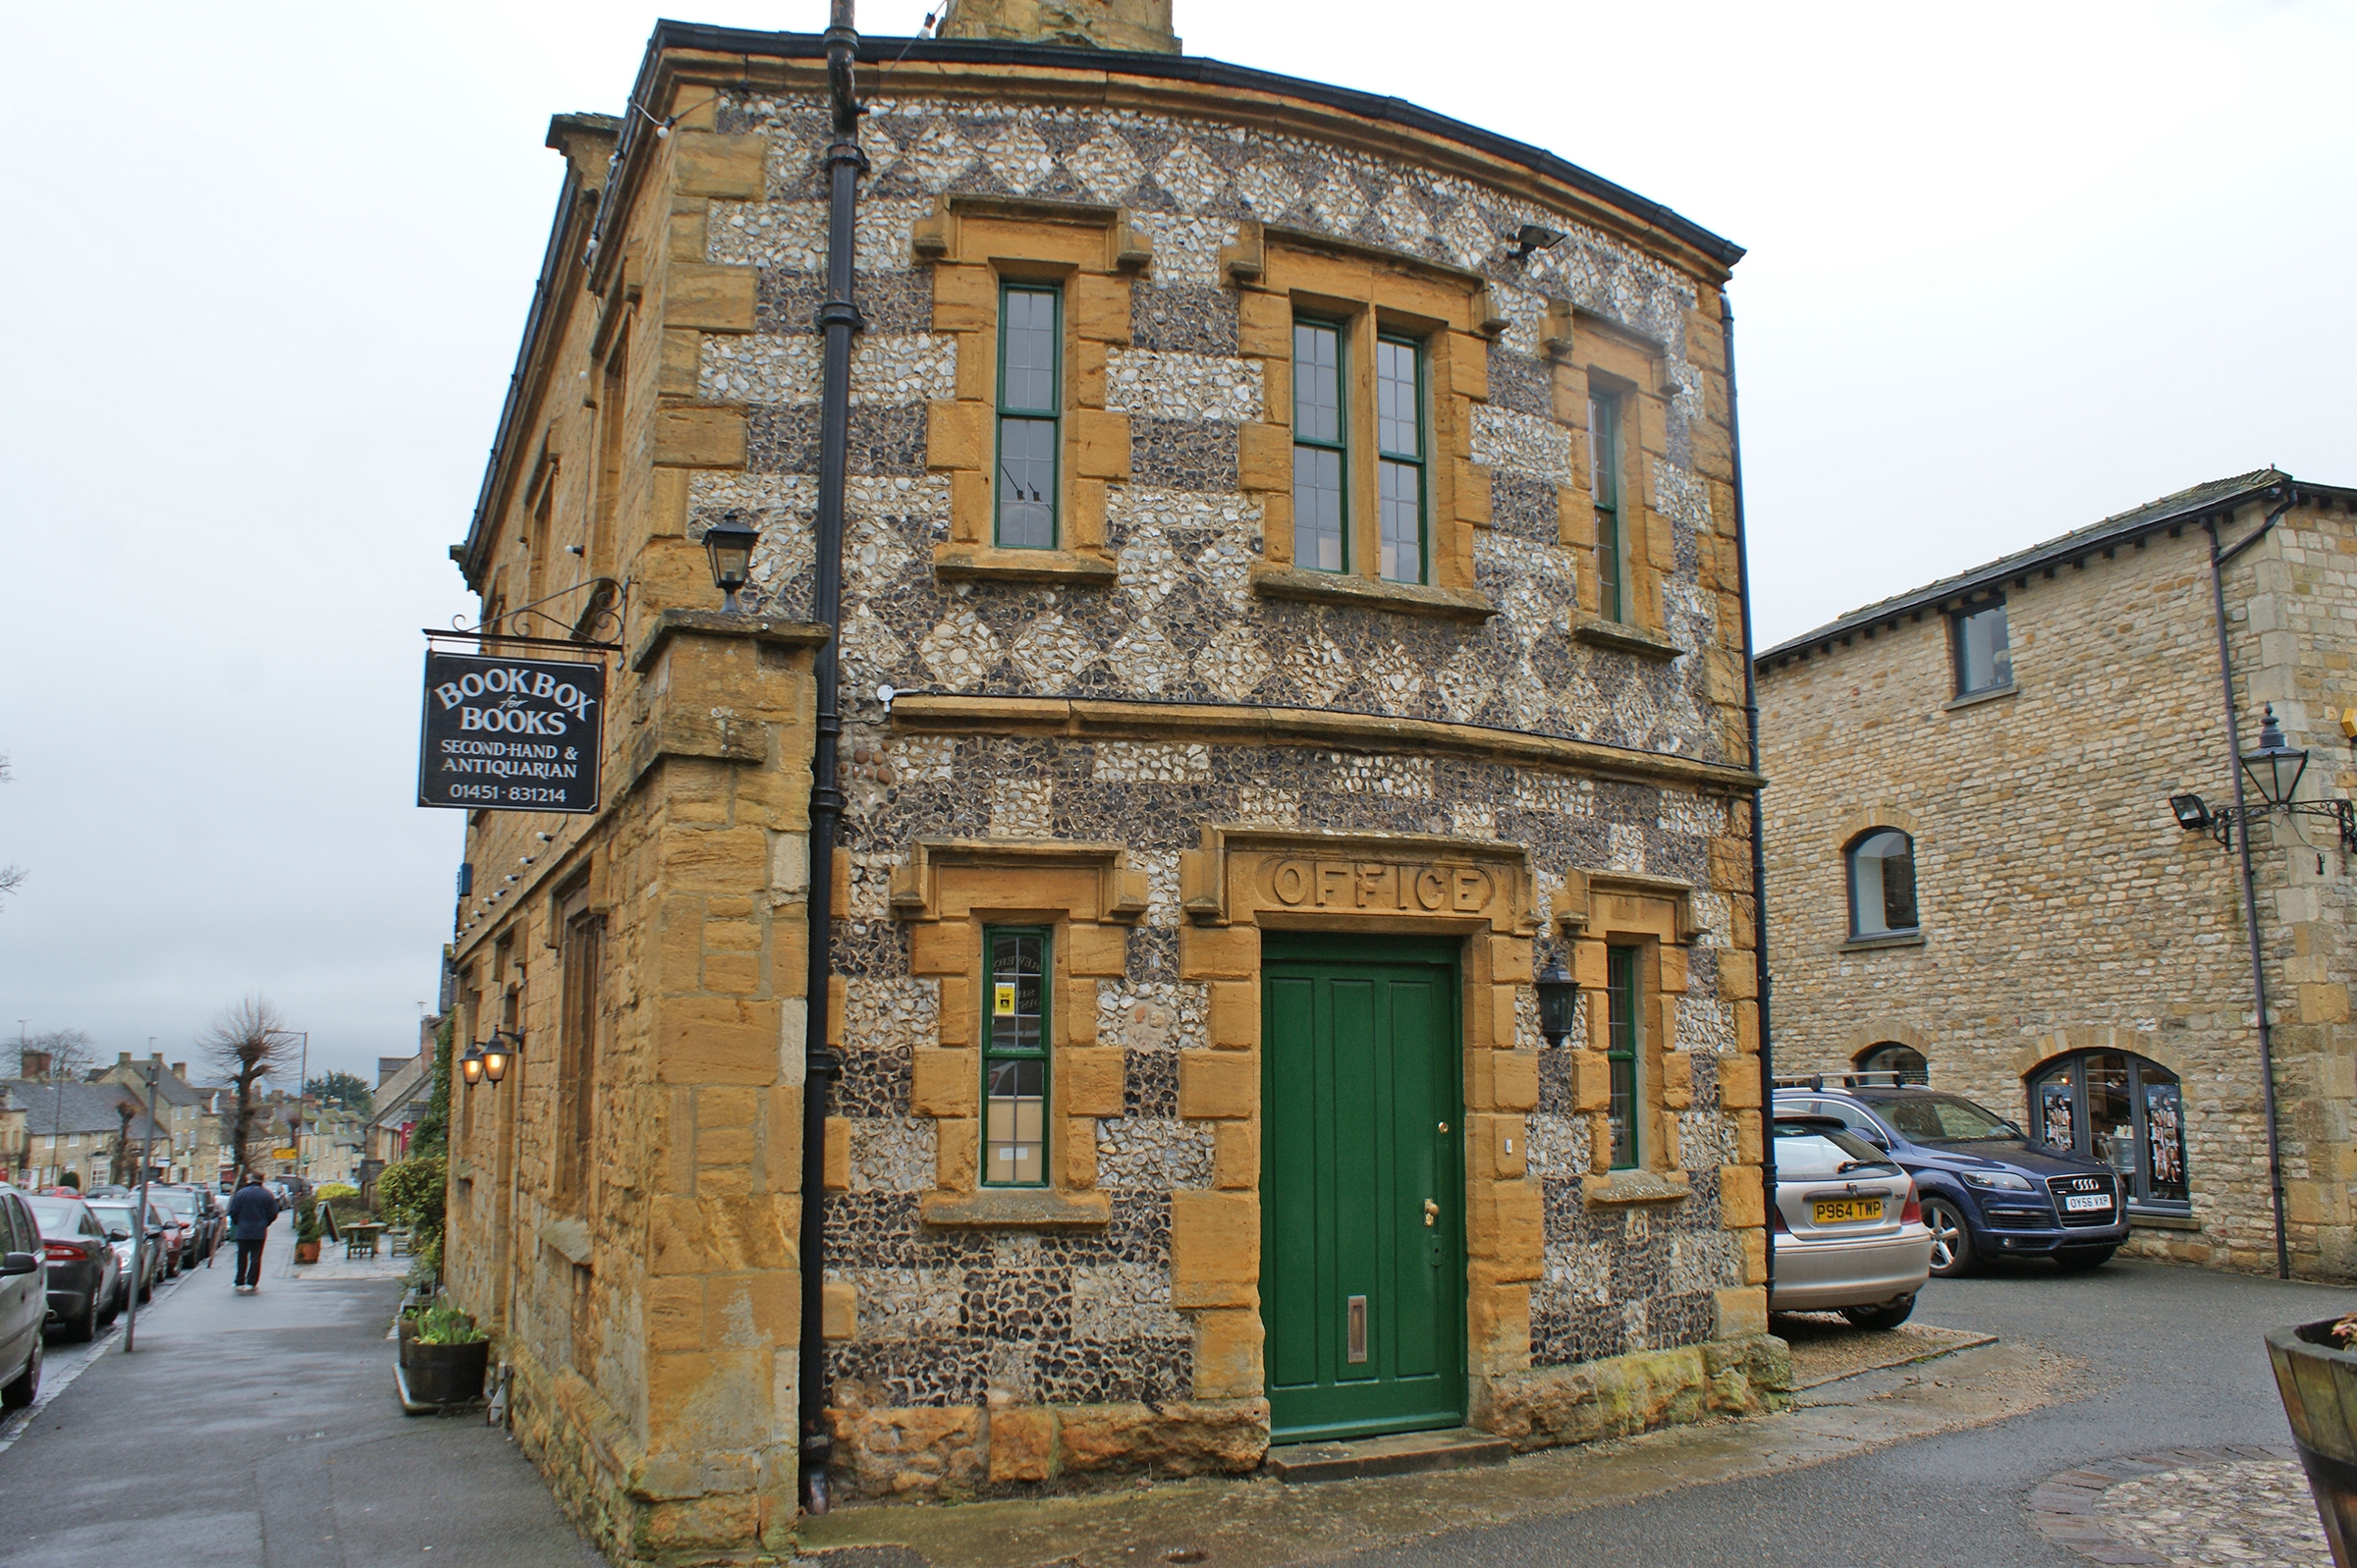 Victoria Brewery - Stow on the Wold